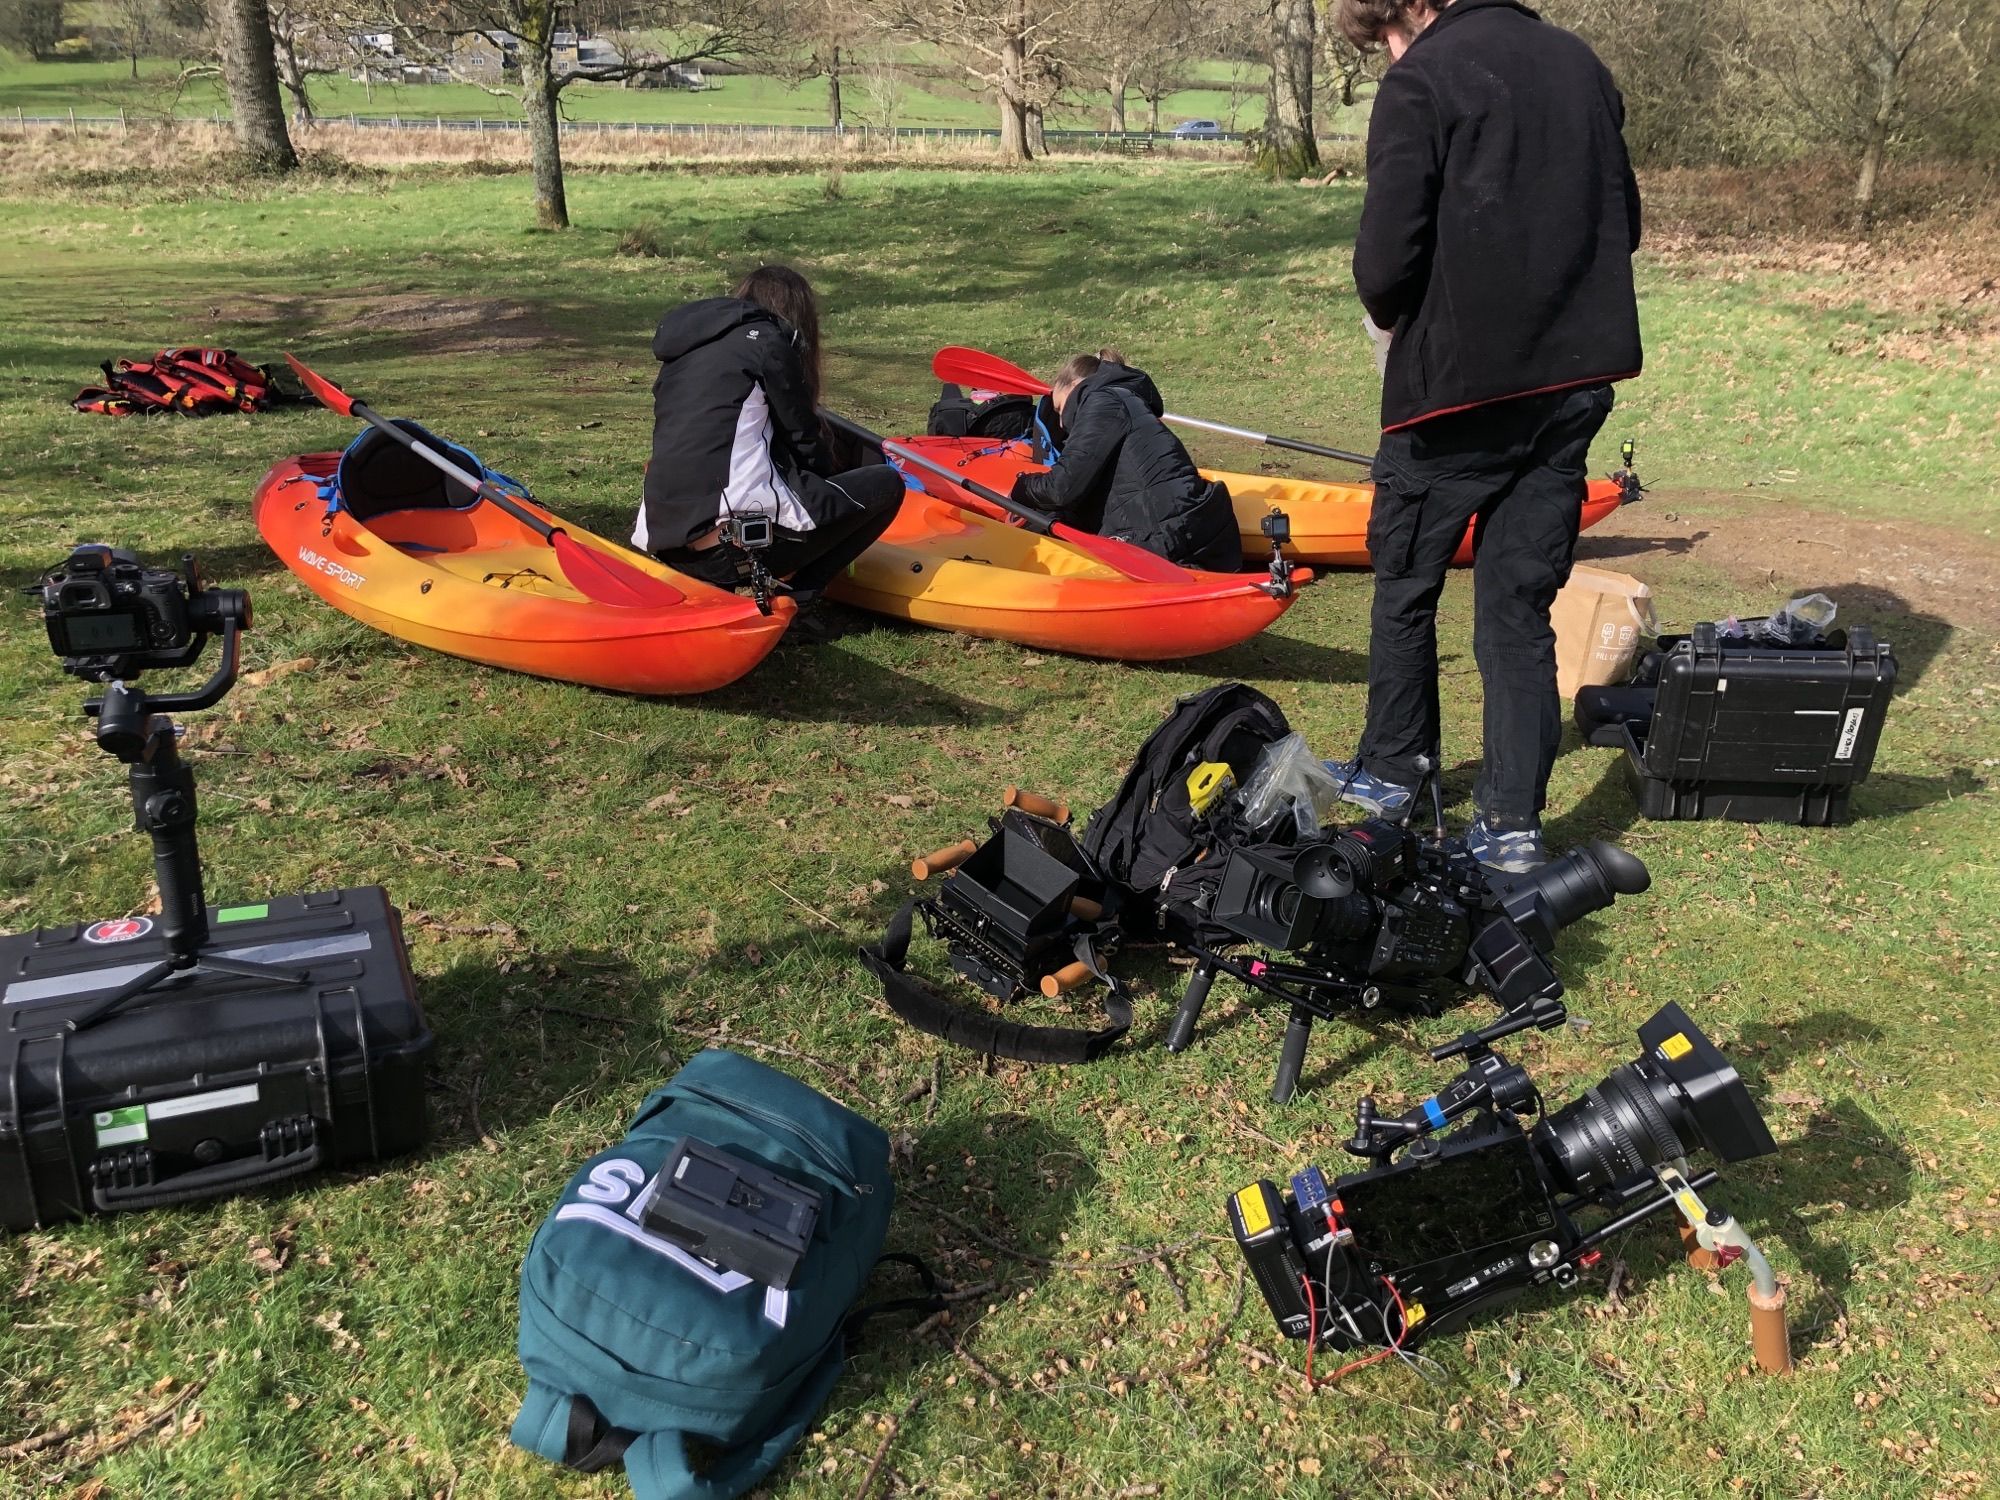 Kayaks and cameras on set of the Real Housewives of Cheshire